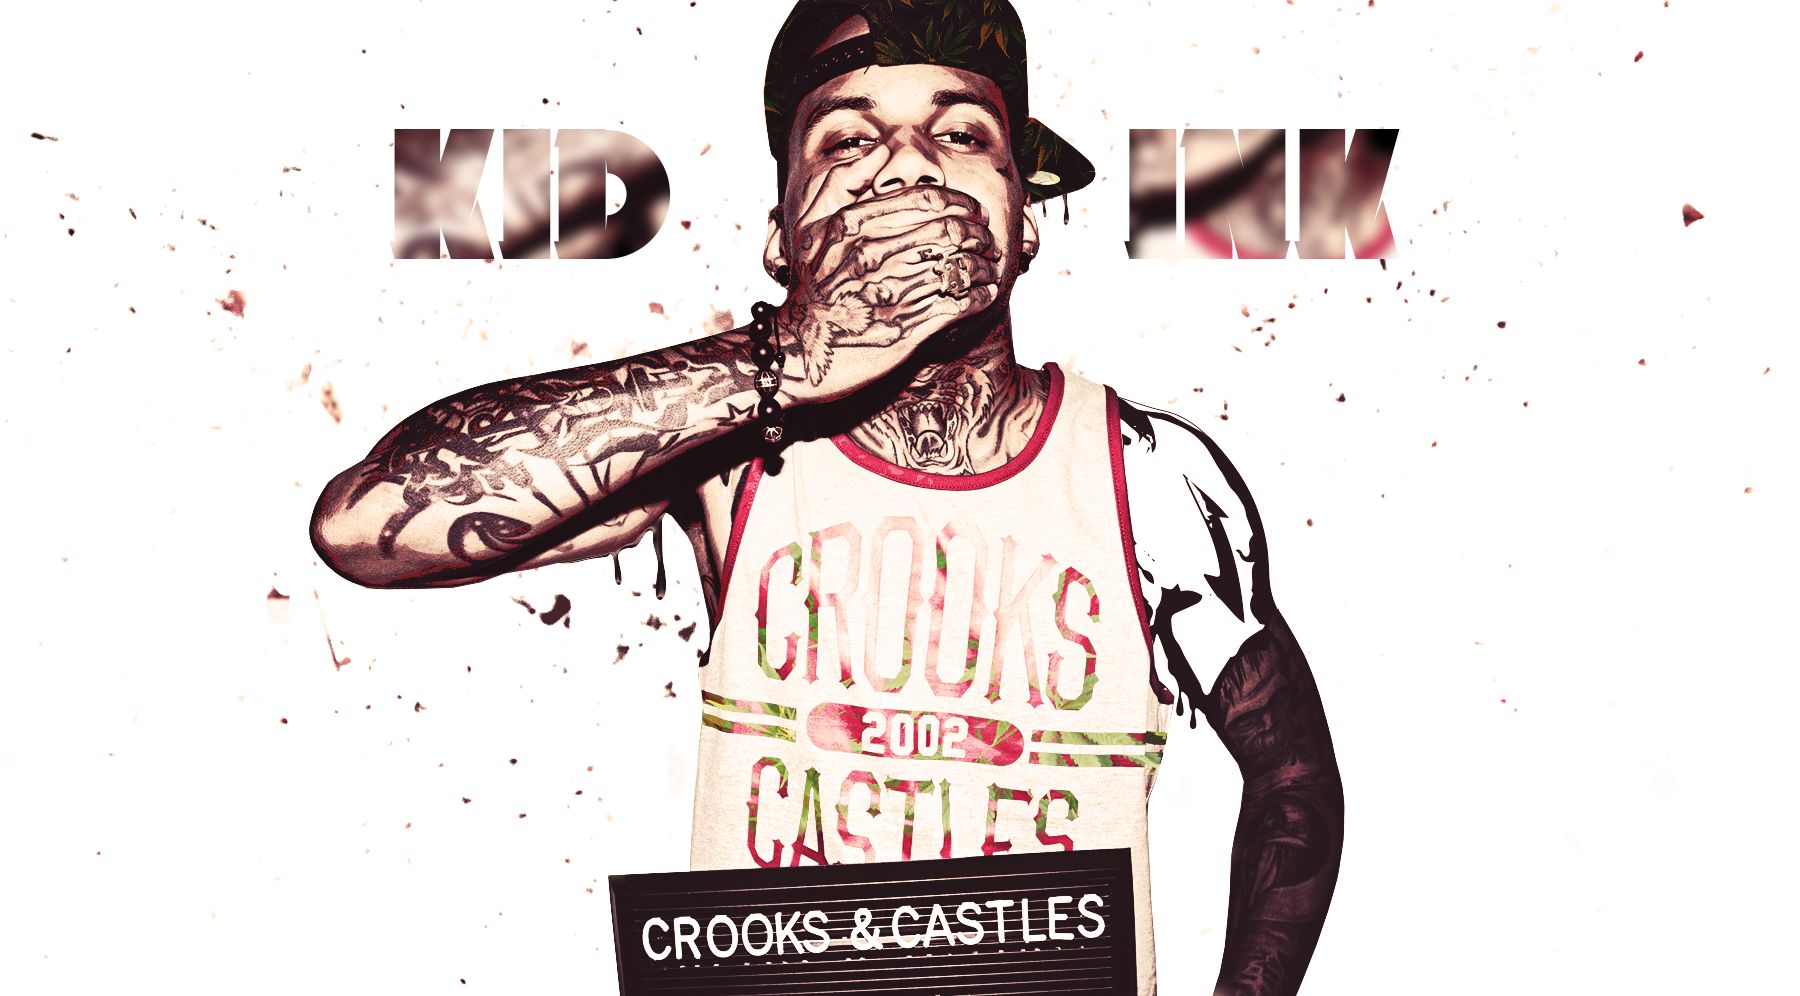 KID INK   Artwork by FUNKiNATiON on